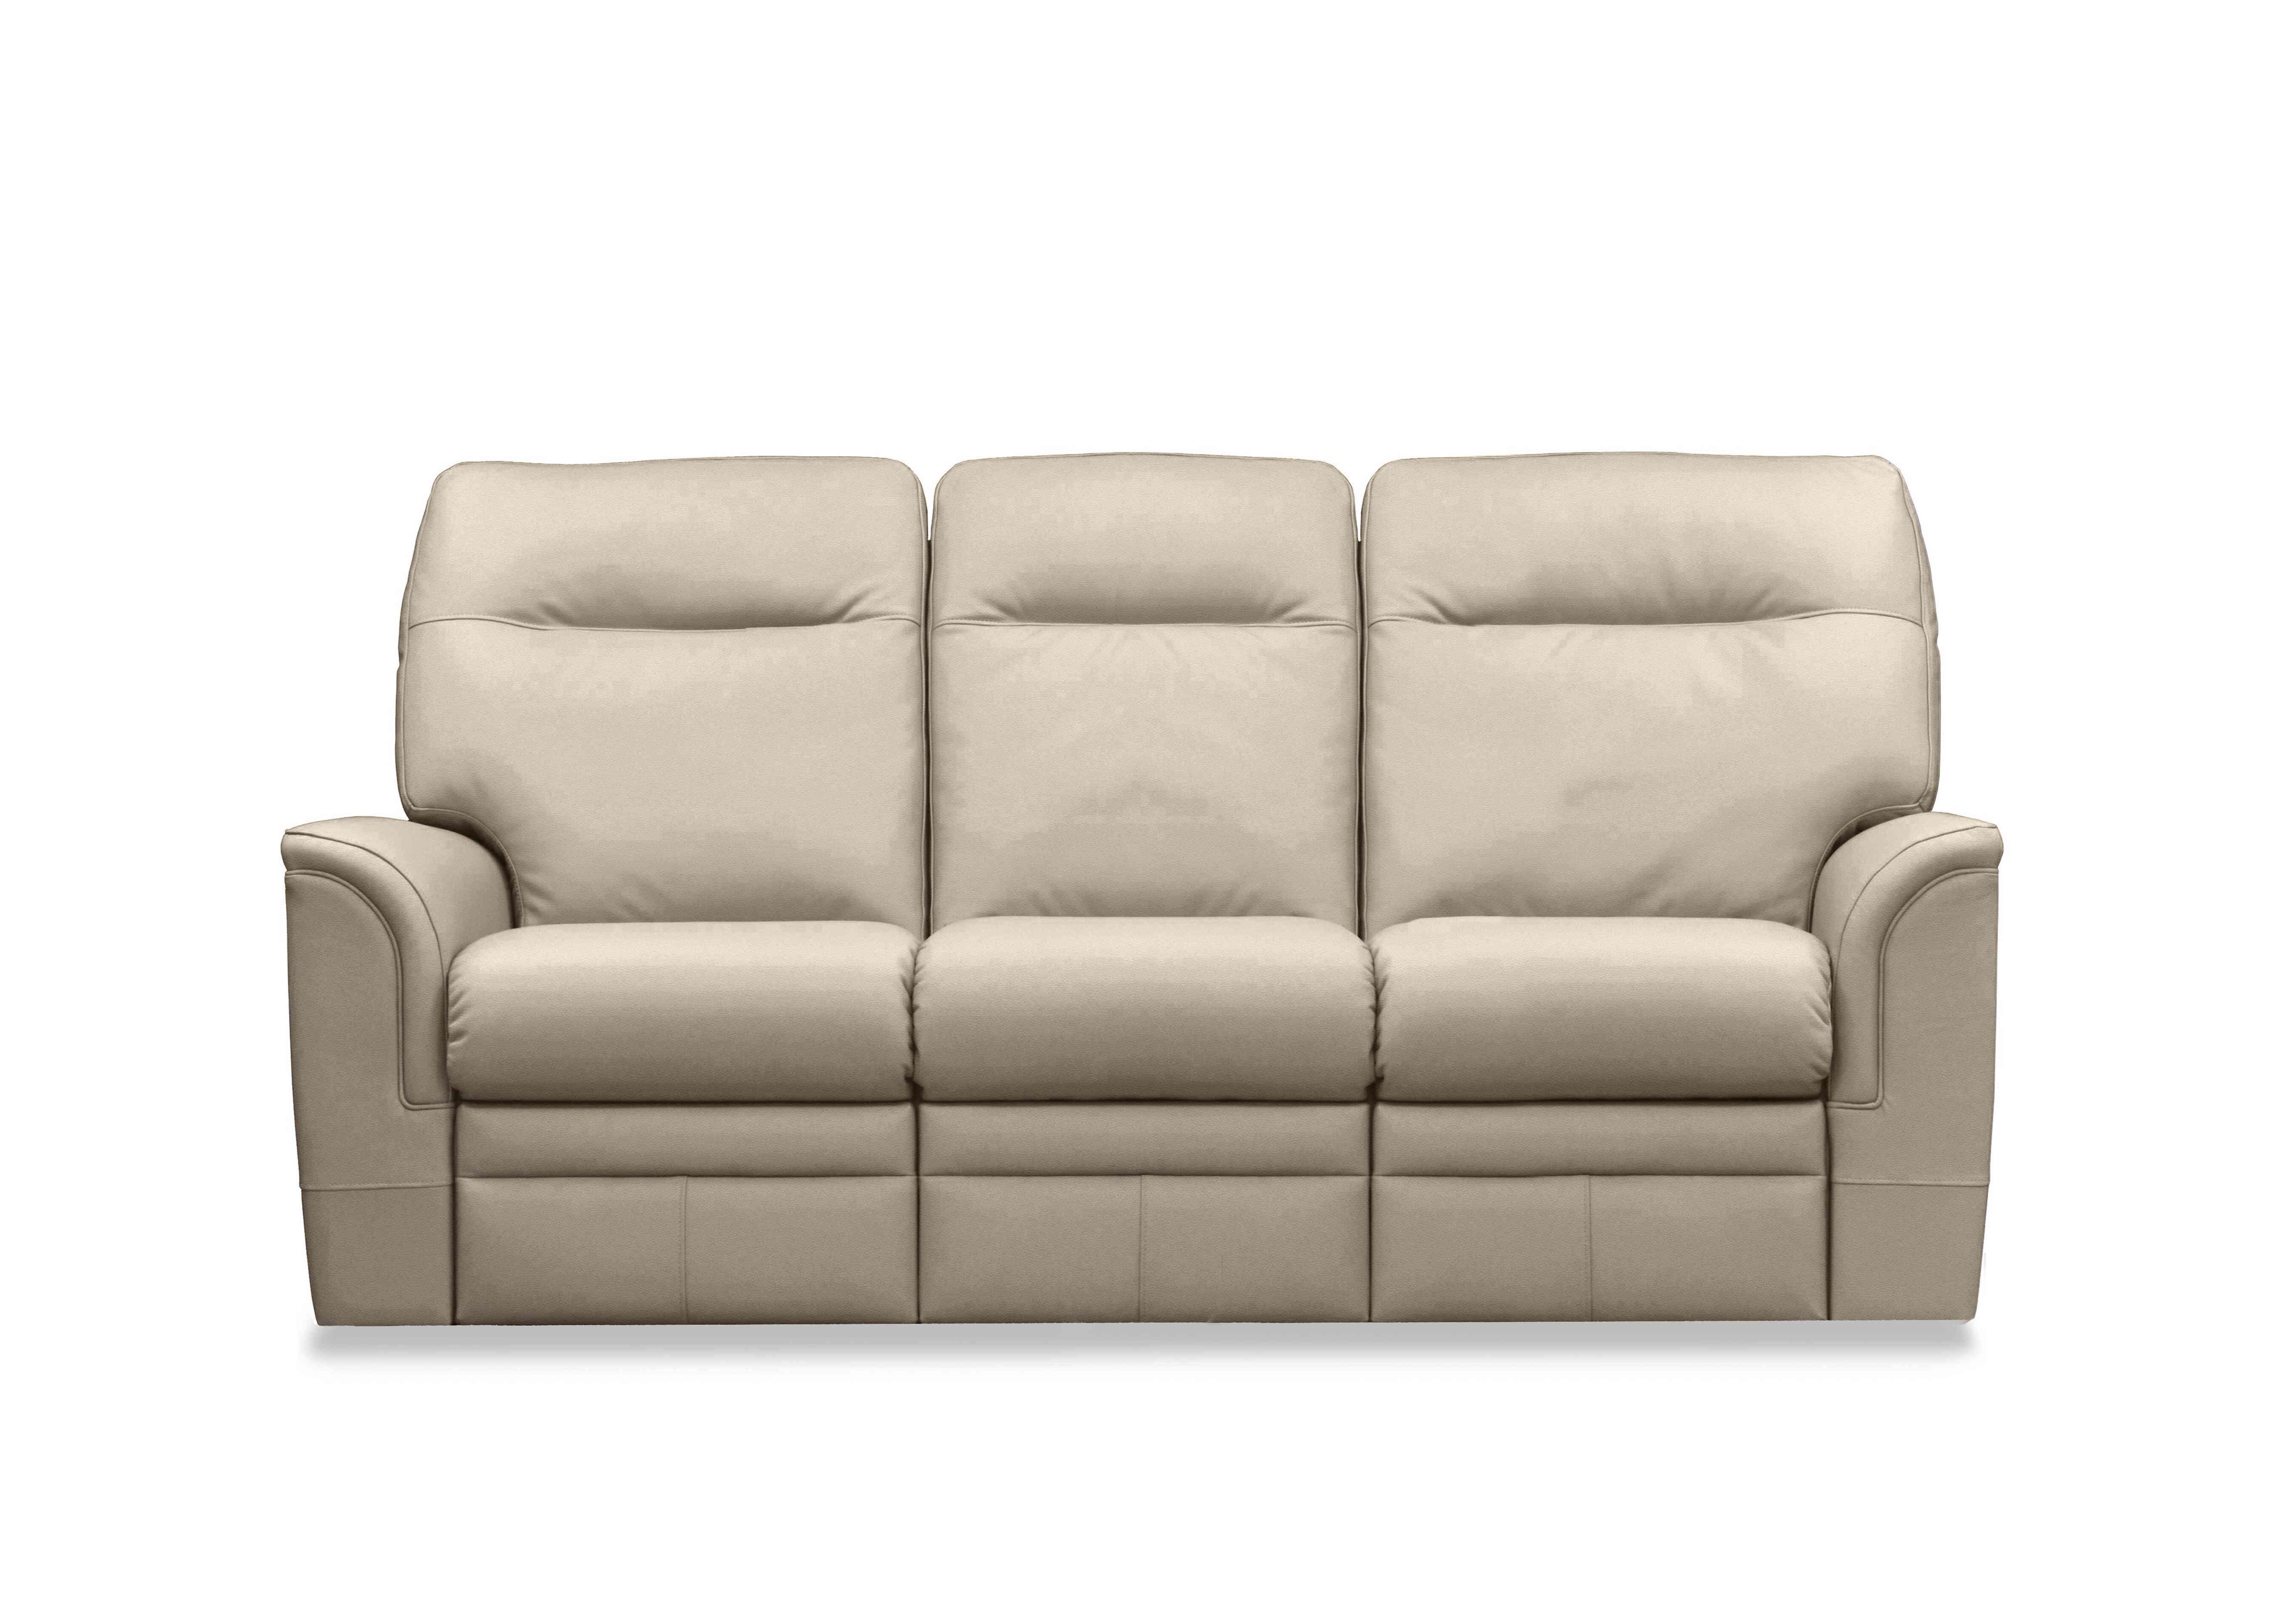 Hudson 23 Leather 3 Seater Power Recliner Sofa with Power Headrests and Power Lumbar in Como Taupe 0053051-0019 on Furniture Village